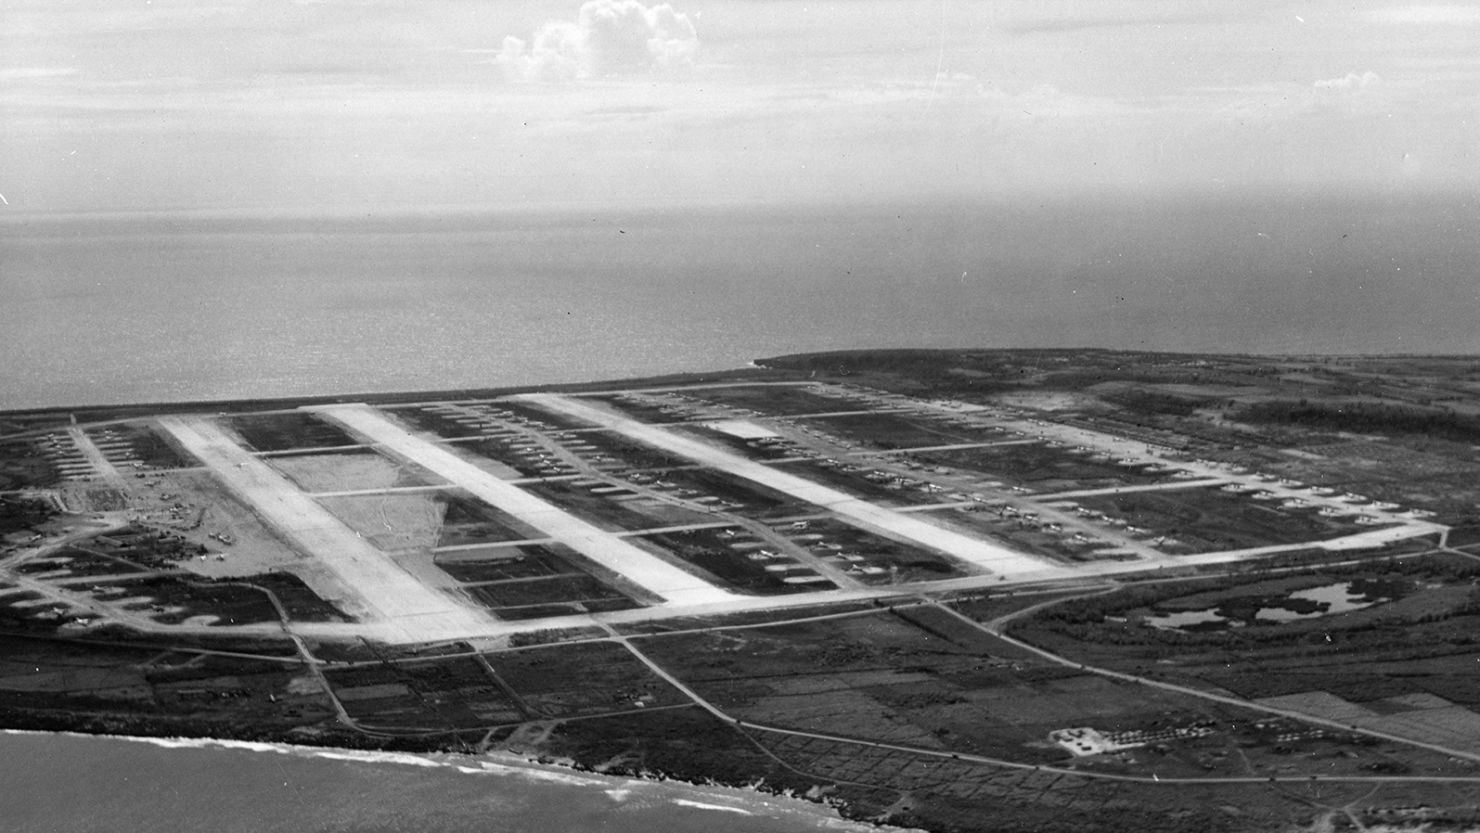 View of North Field, where the 'Enola Gay' was to later take off (in August 1945), Tinian, Northern Mariana Islands, March 31, 1945. (Photo by PhotoQuest/Getty Images)